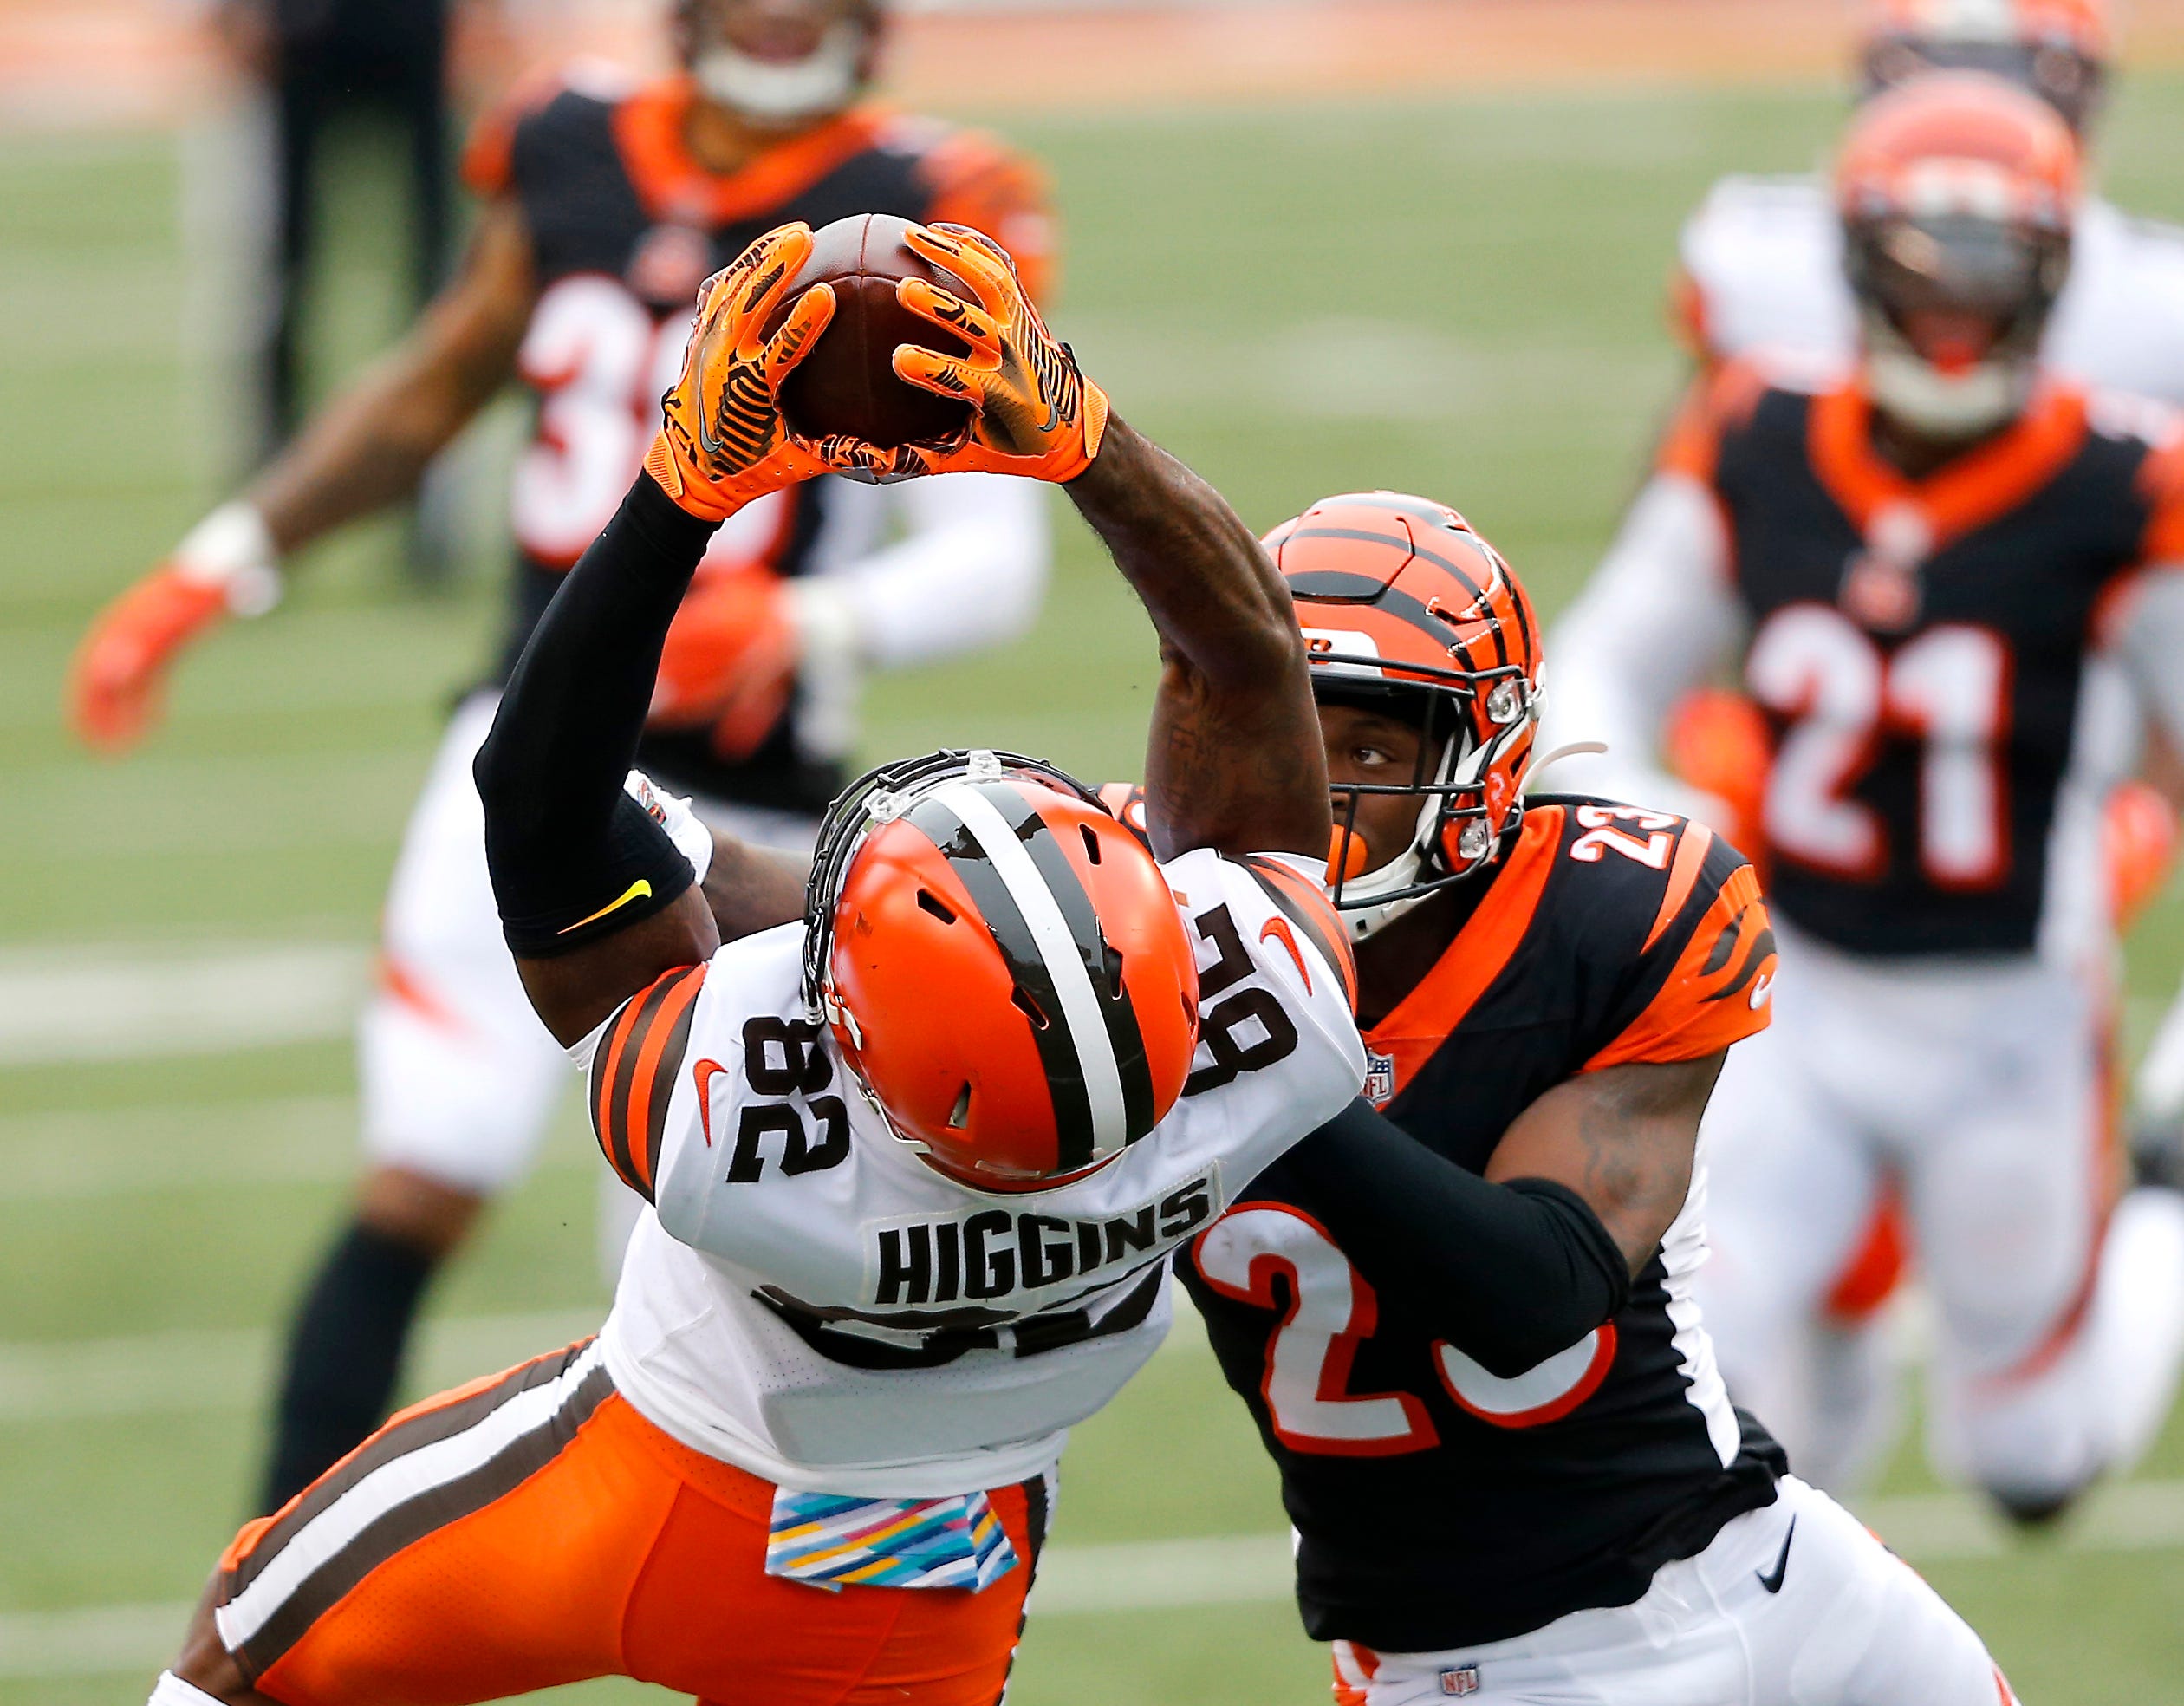 Fantasy football waiver wire: Who gets Odell Beckham's targets for Cleveland Browns?